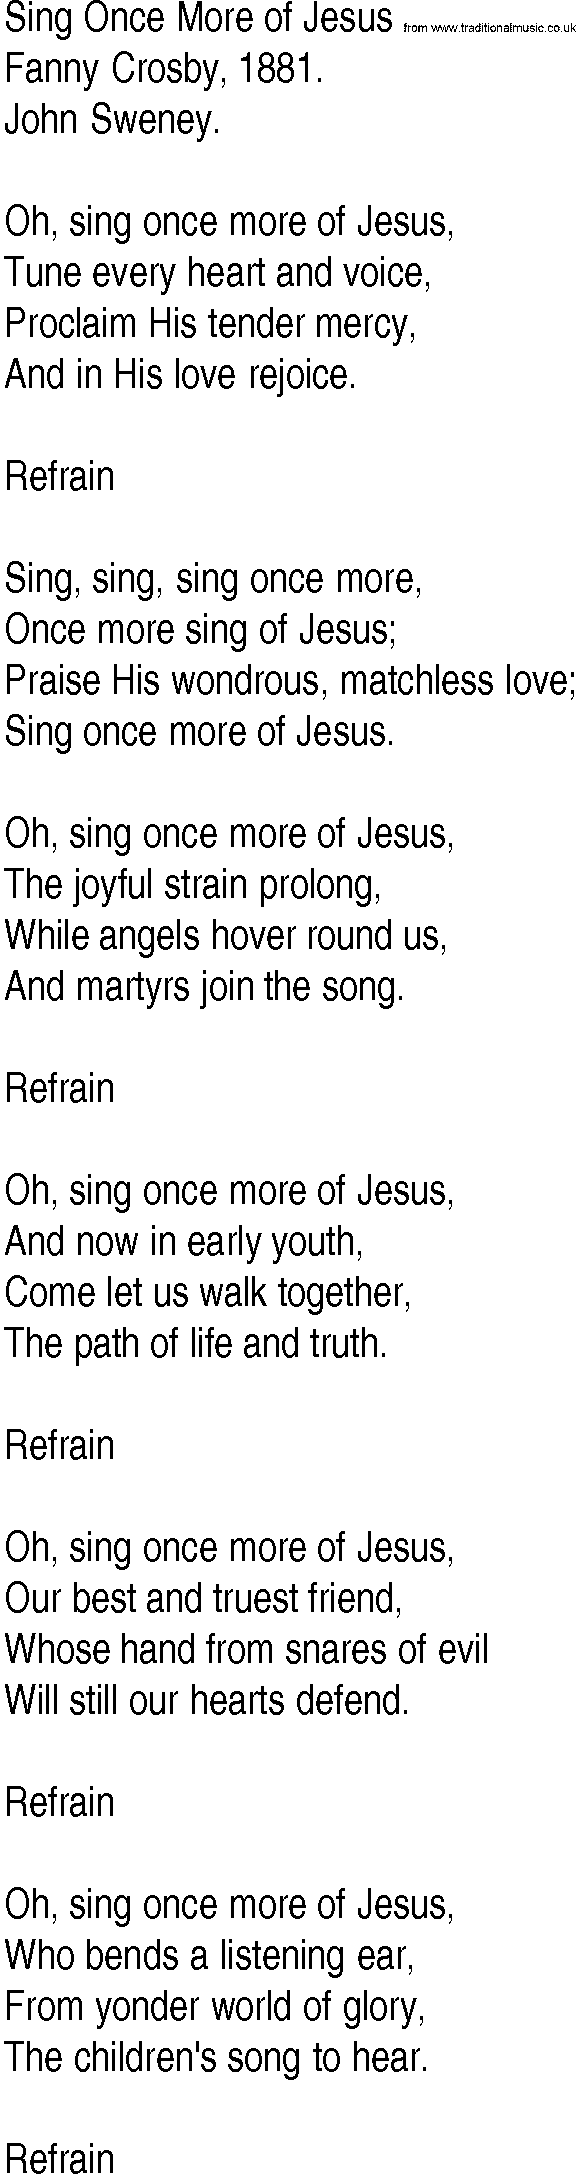 Hymn and Gospel Song: Sing Once More of Jesus by Fanny Crosby lyrics